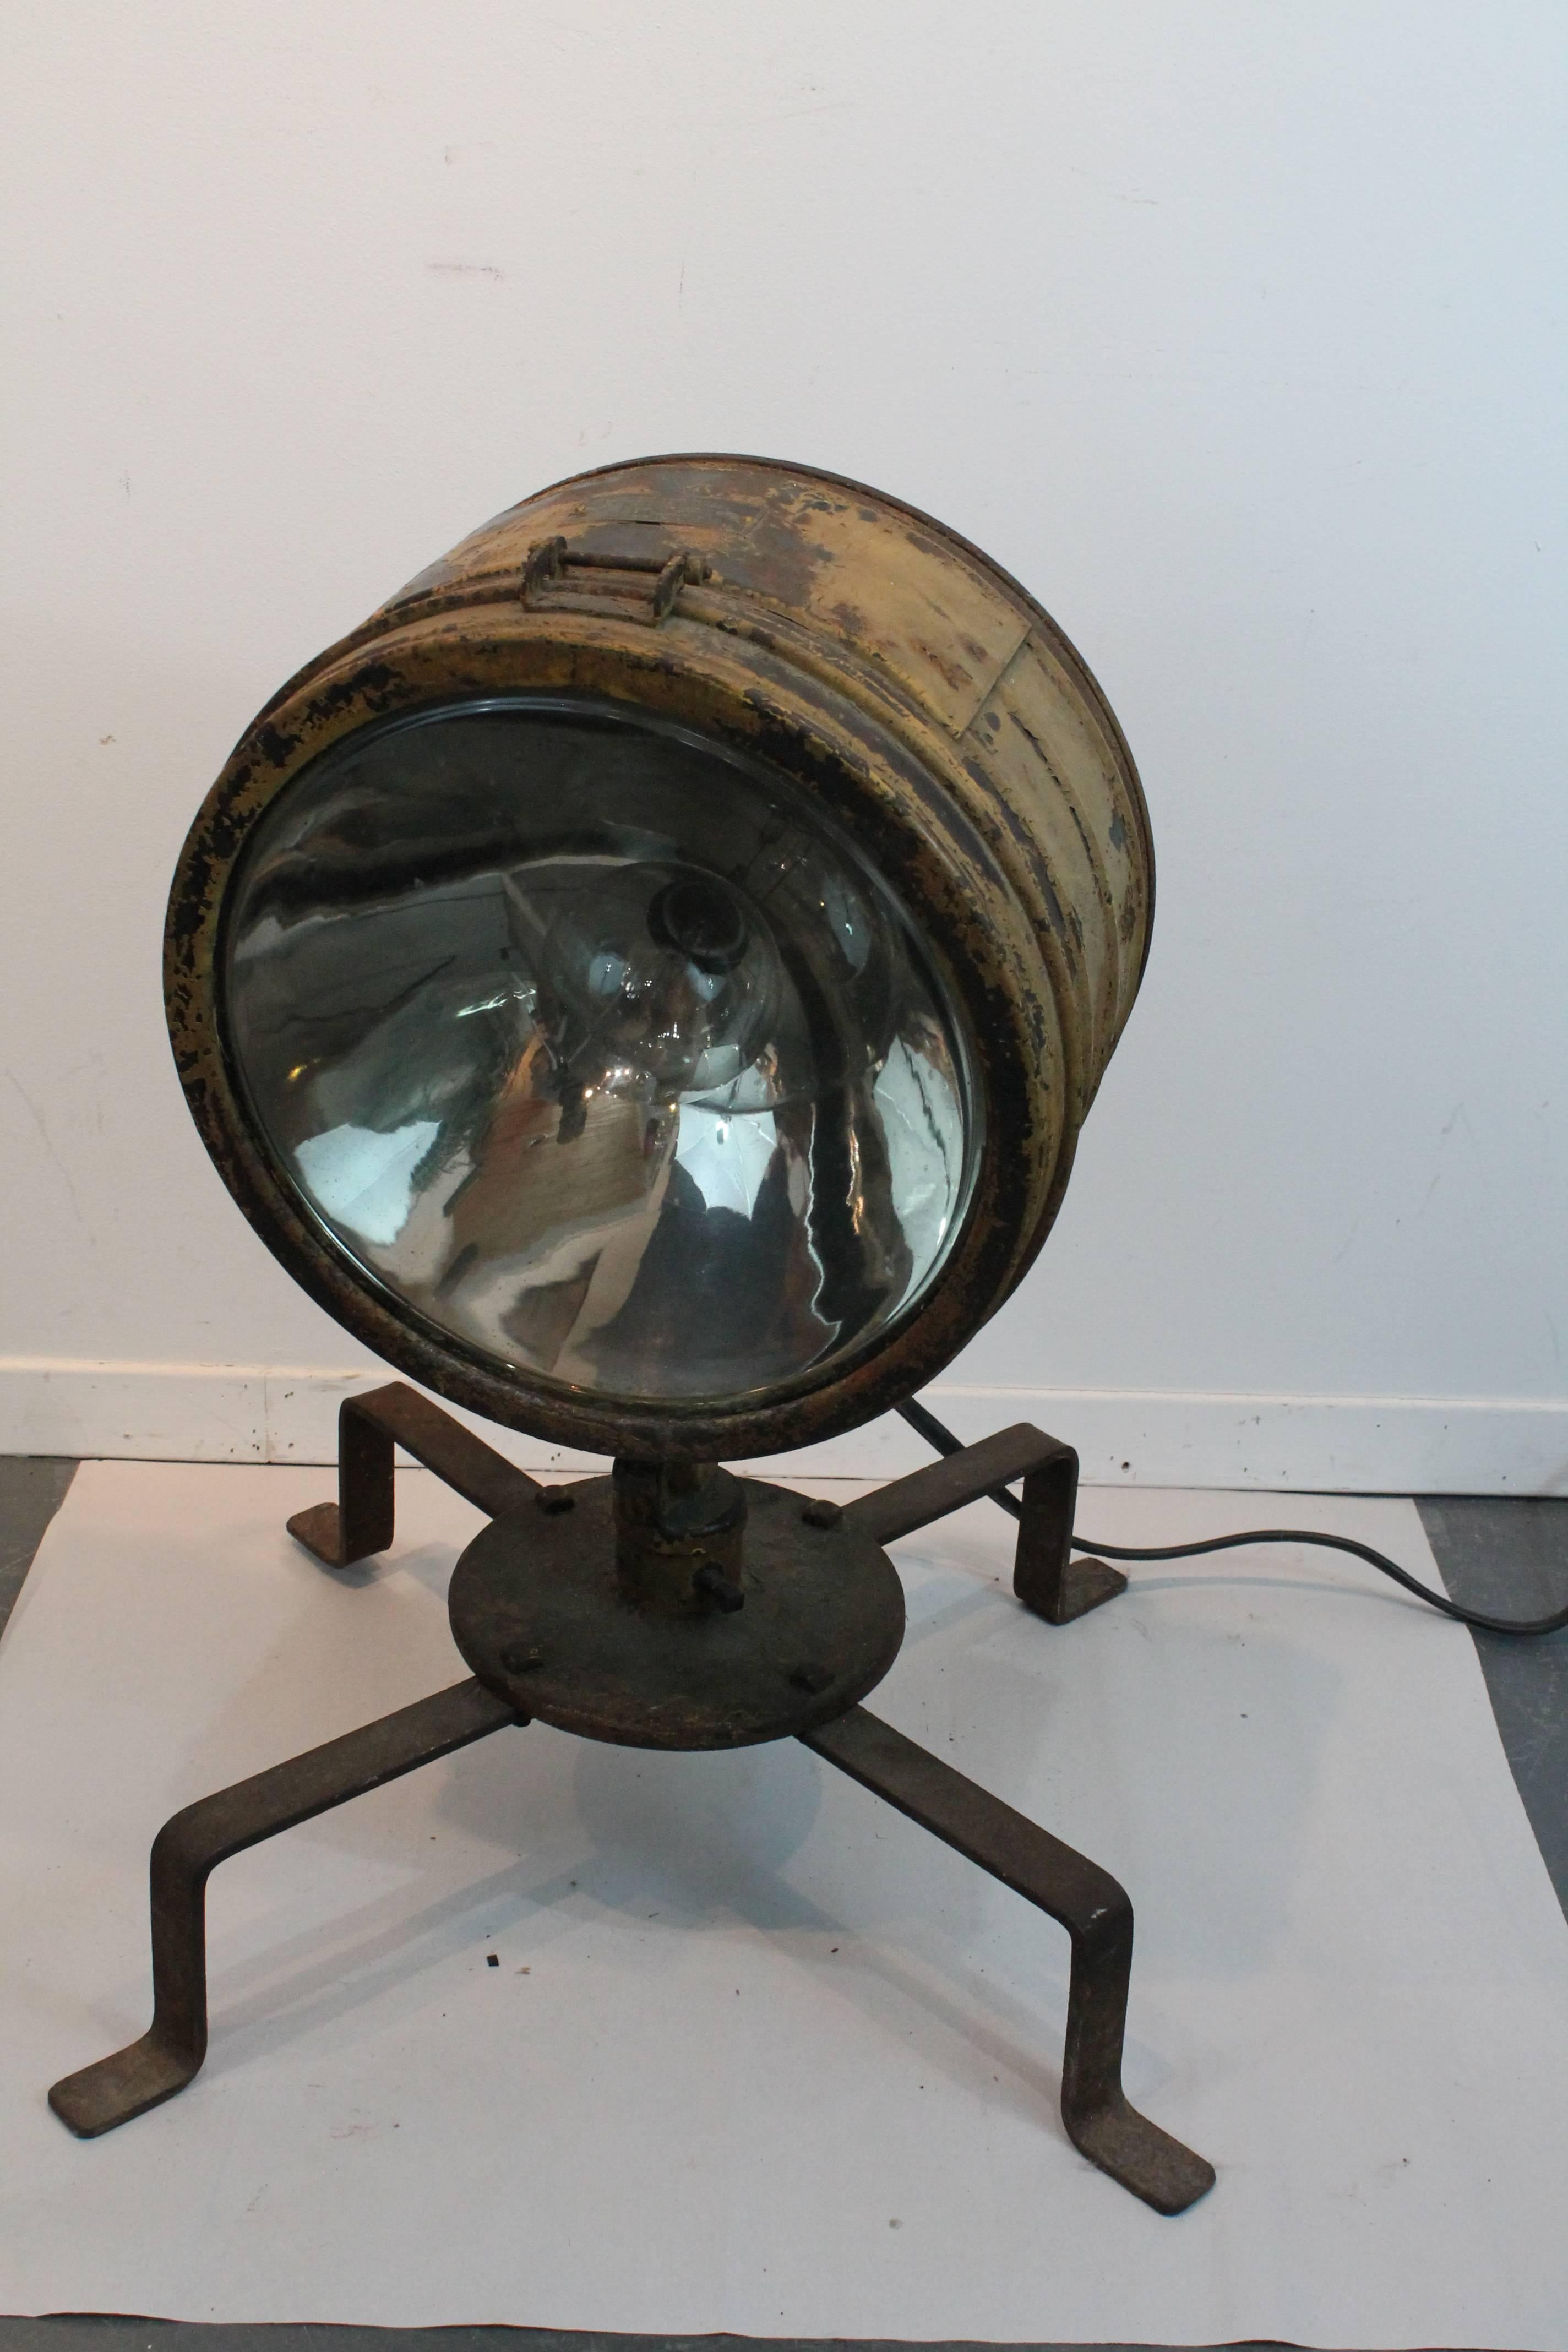 Functional Crouse-Hinds spotlight that swivels and is removable from the base.
Great distressed mustard paint.
  